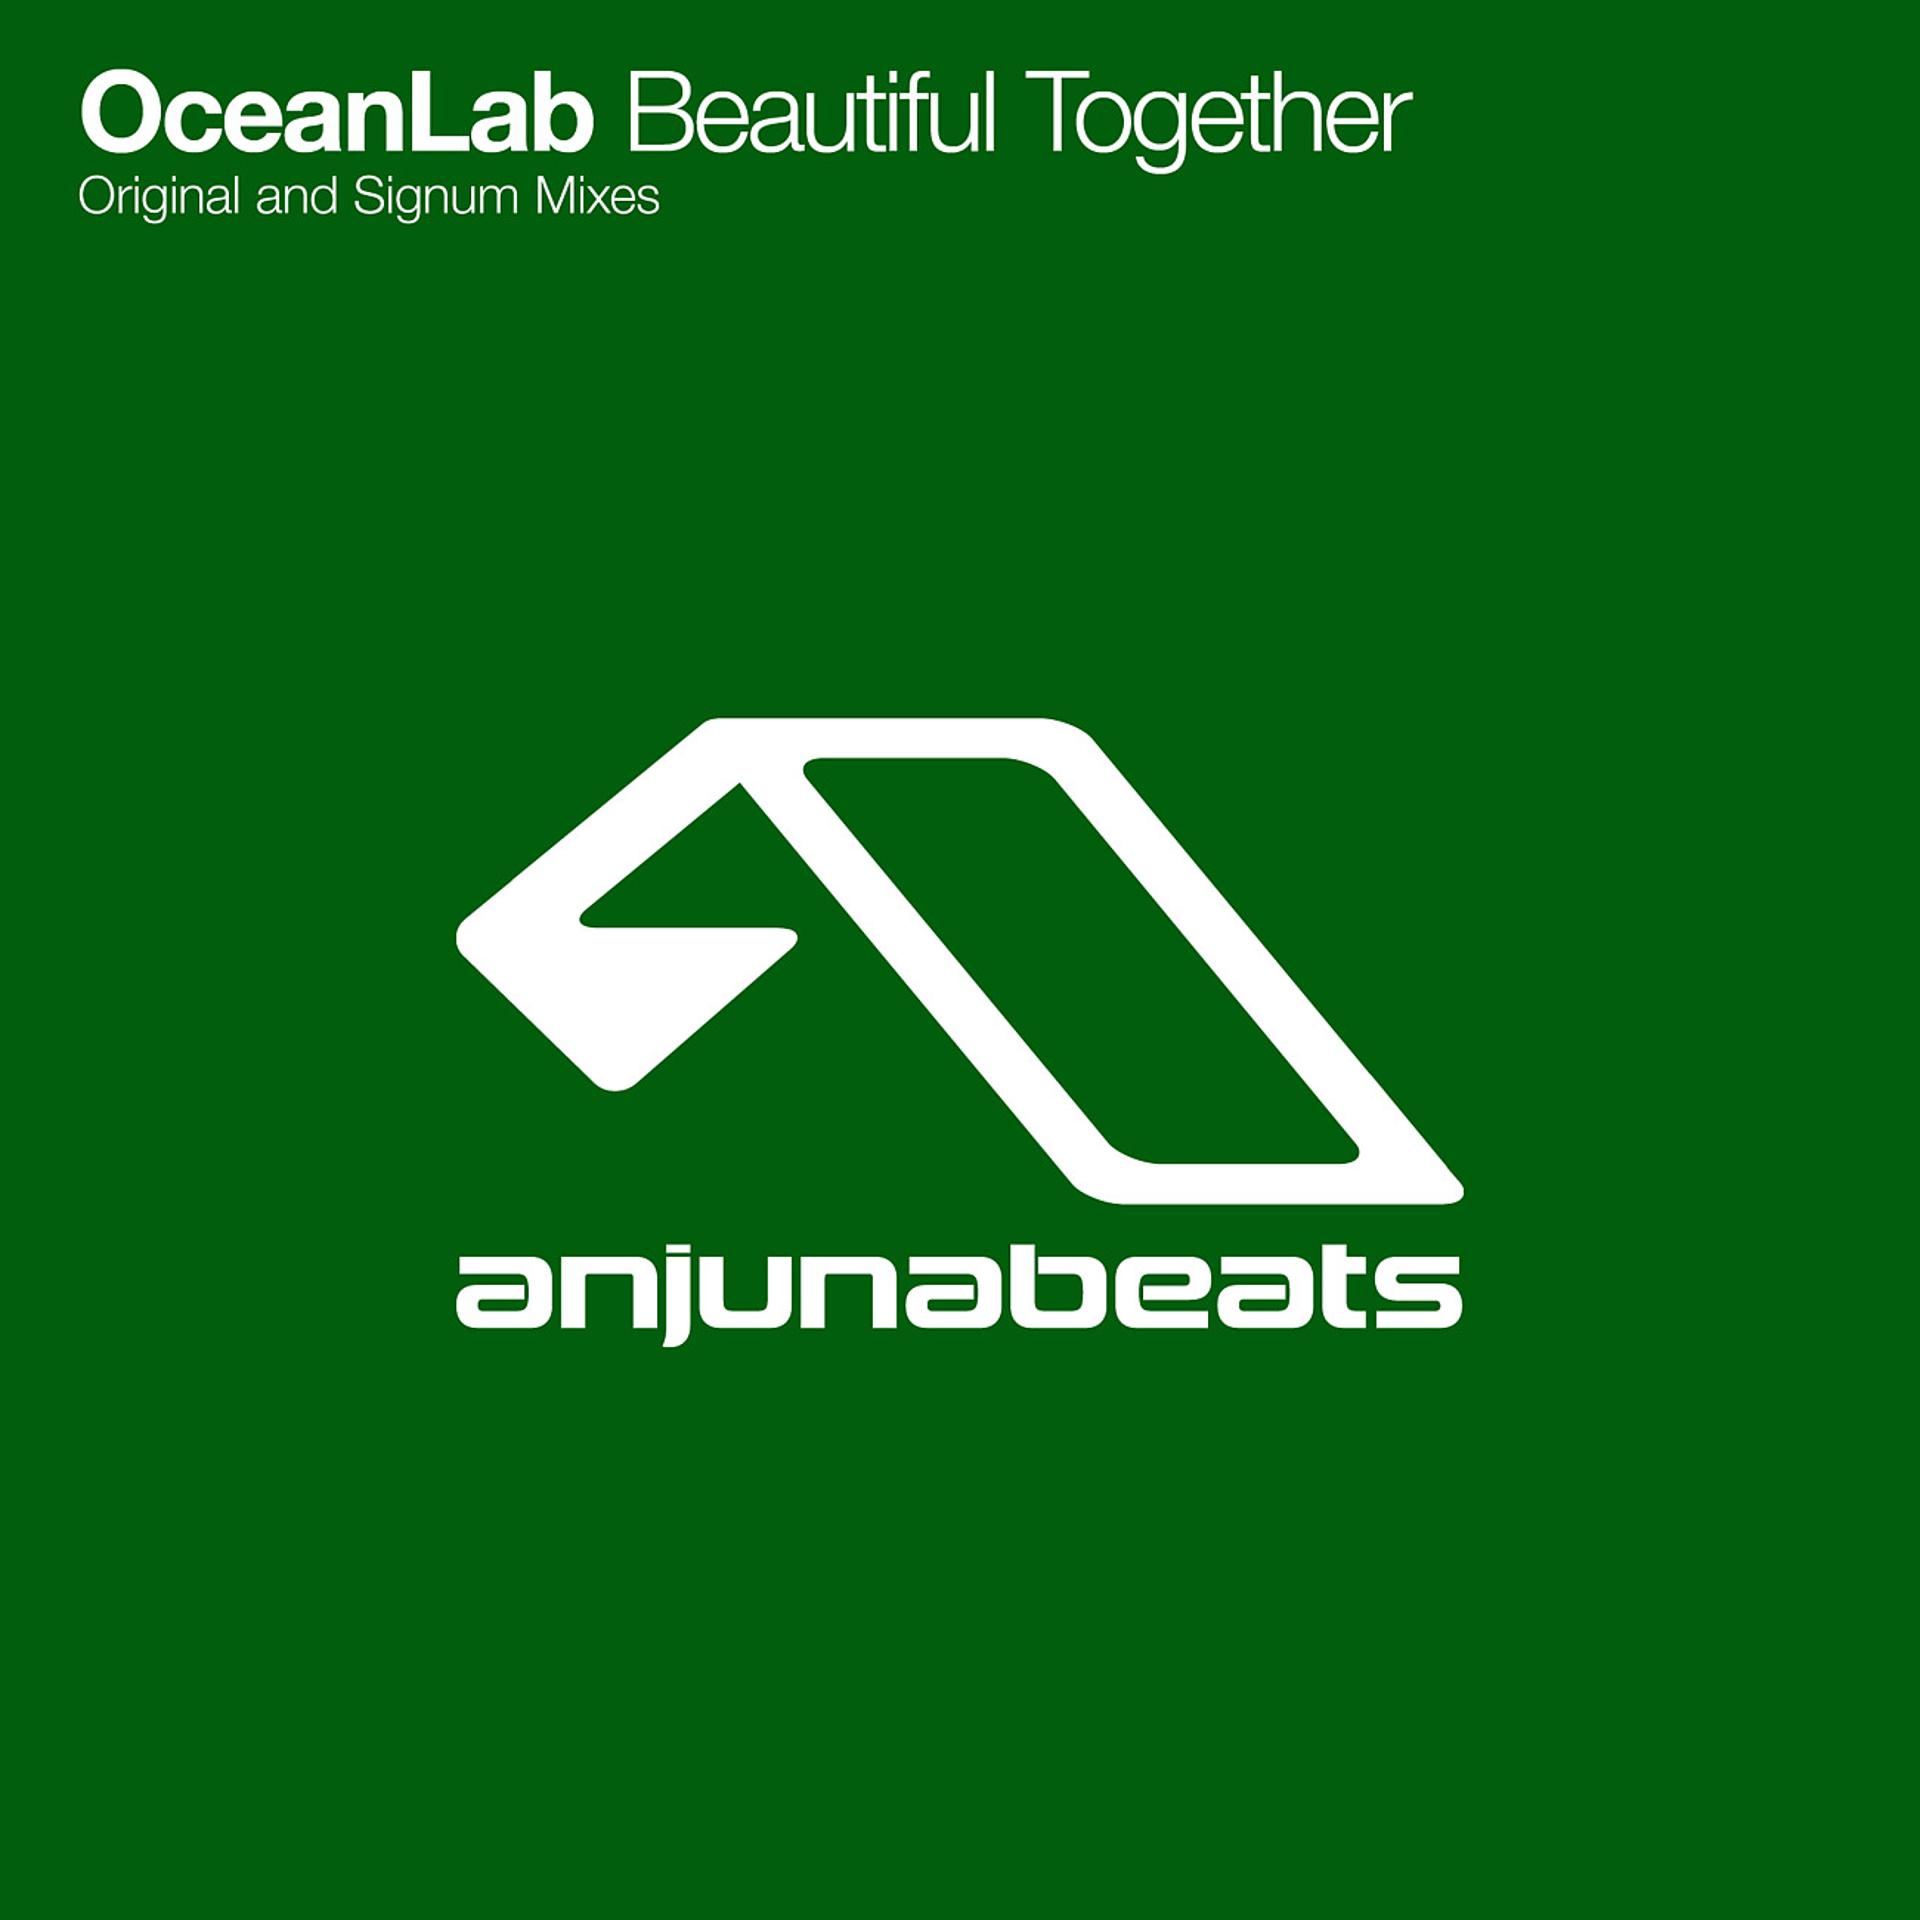 If you can keep your. Above Beyond Air for Life. Anjunabeats 2011. Above Beyond Sirens of the Sea. Anjunadeep майка.